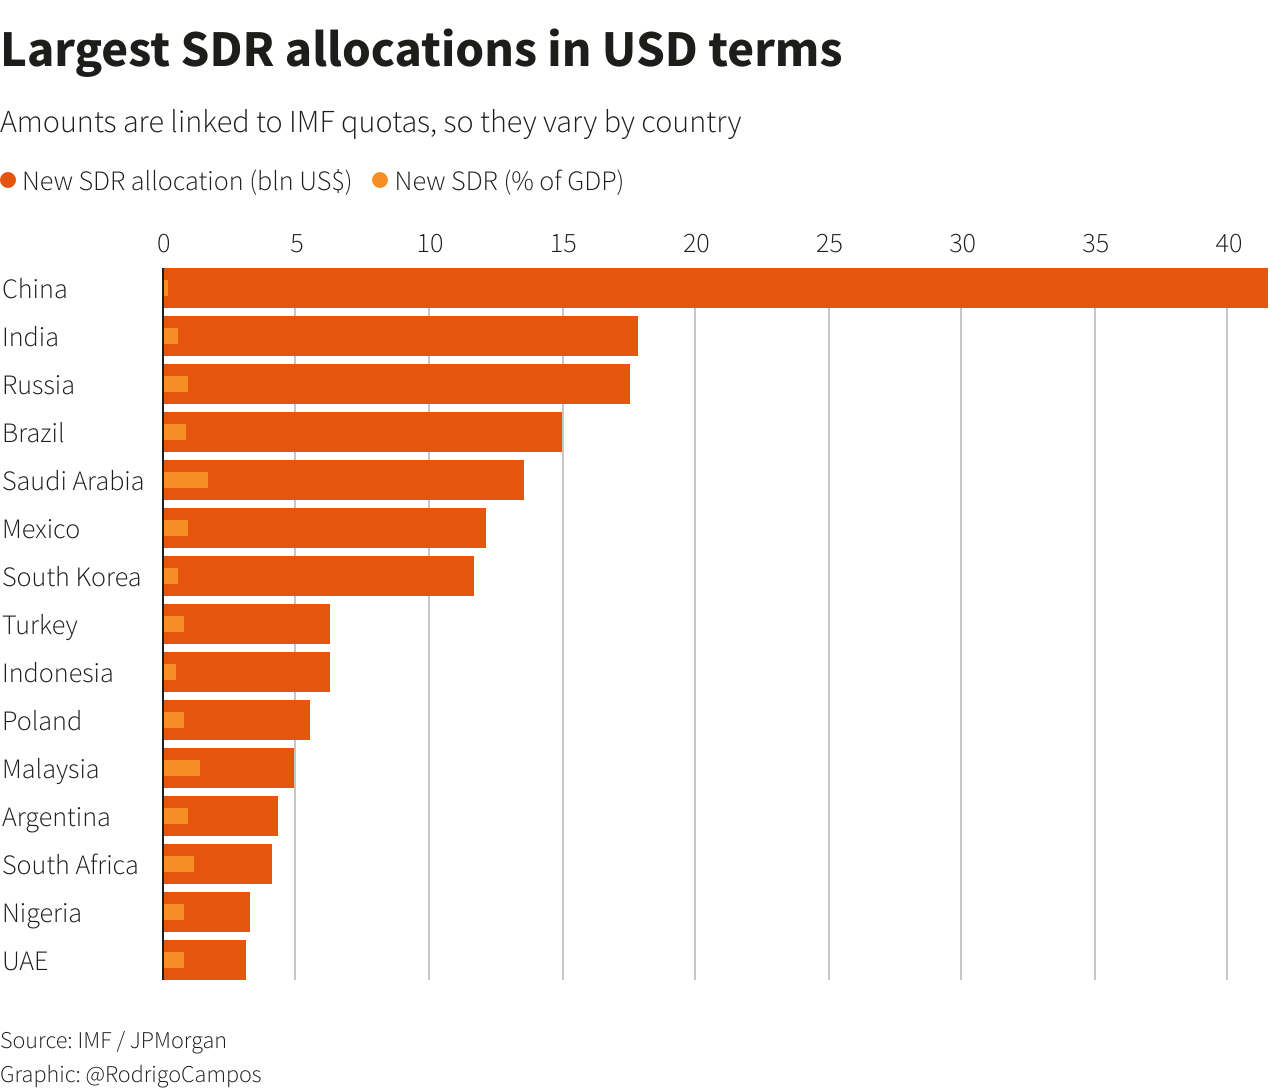 Largest SDR allocations in USD terms